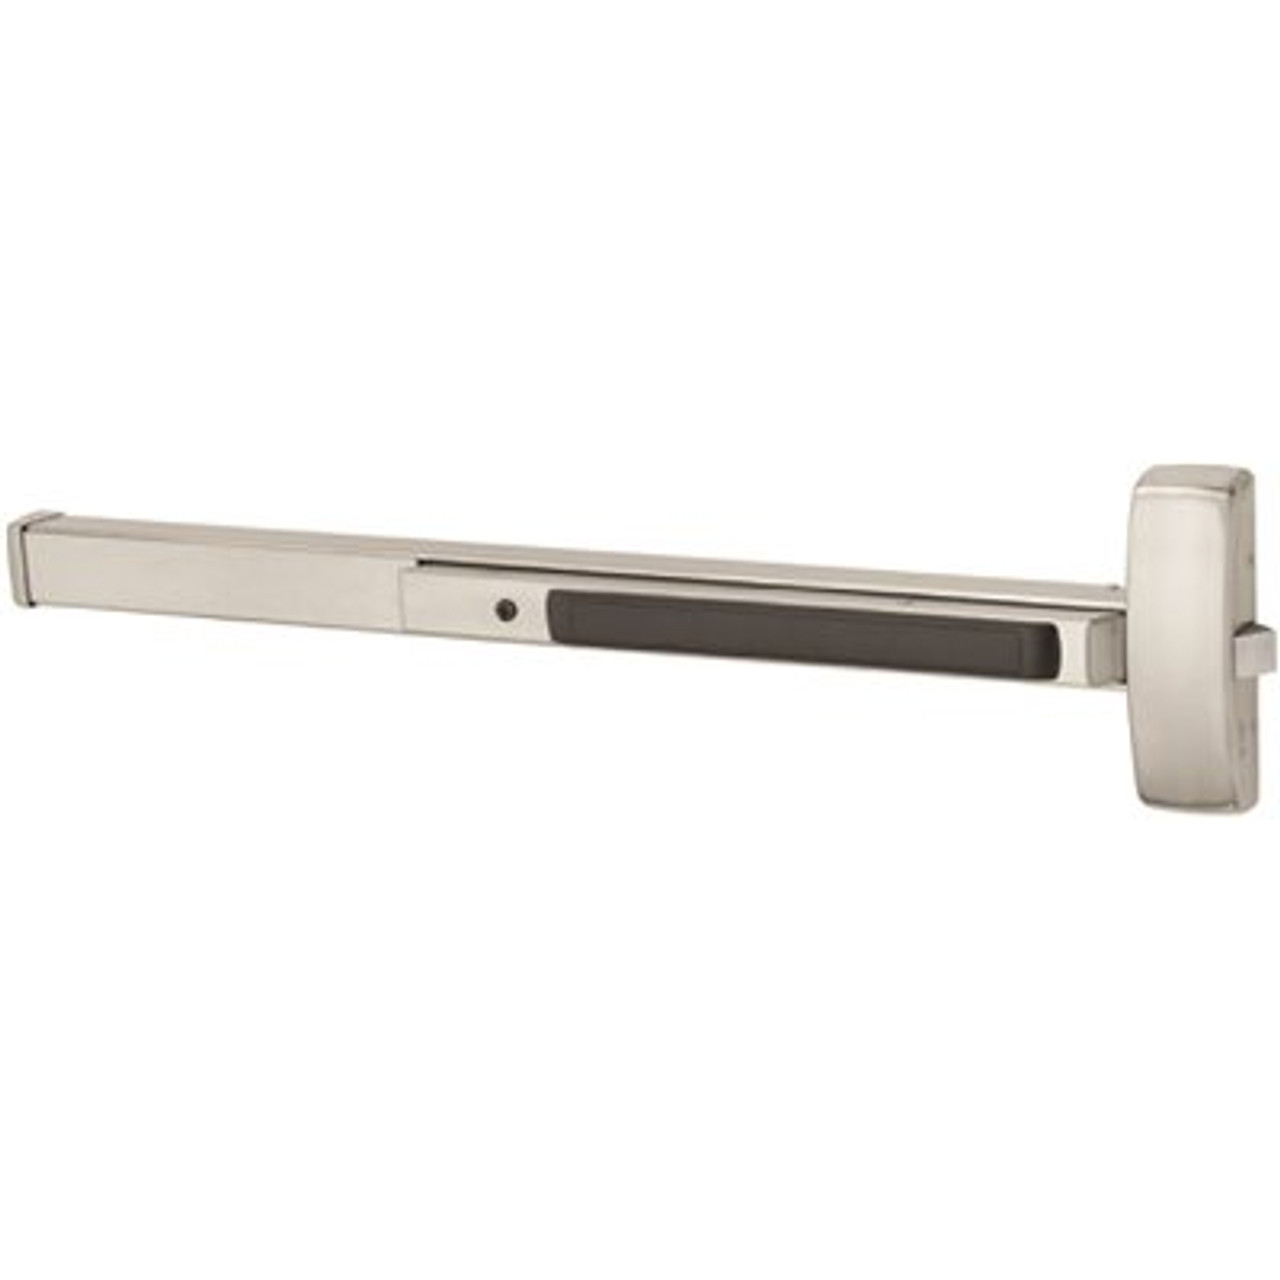 Sargent 80 Series Grade 1,36 In. Stainless Steel Finish Non-Handed Fire Rated Classroom Surface Exit Device